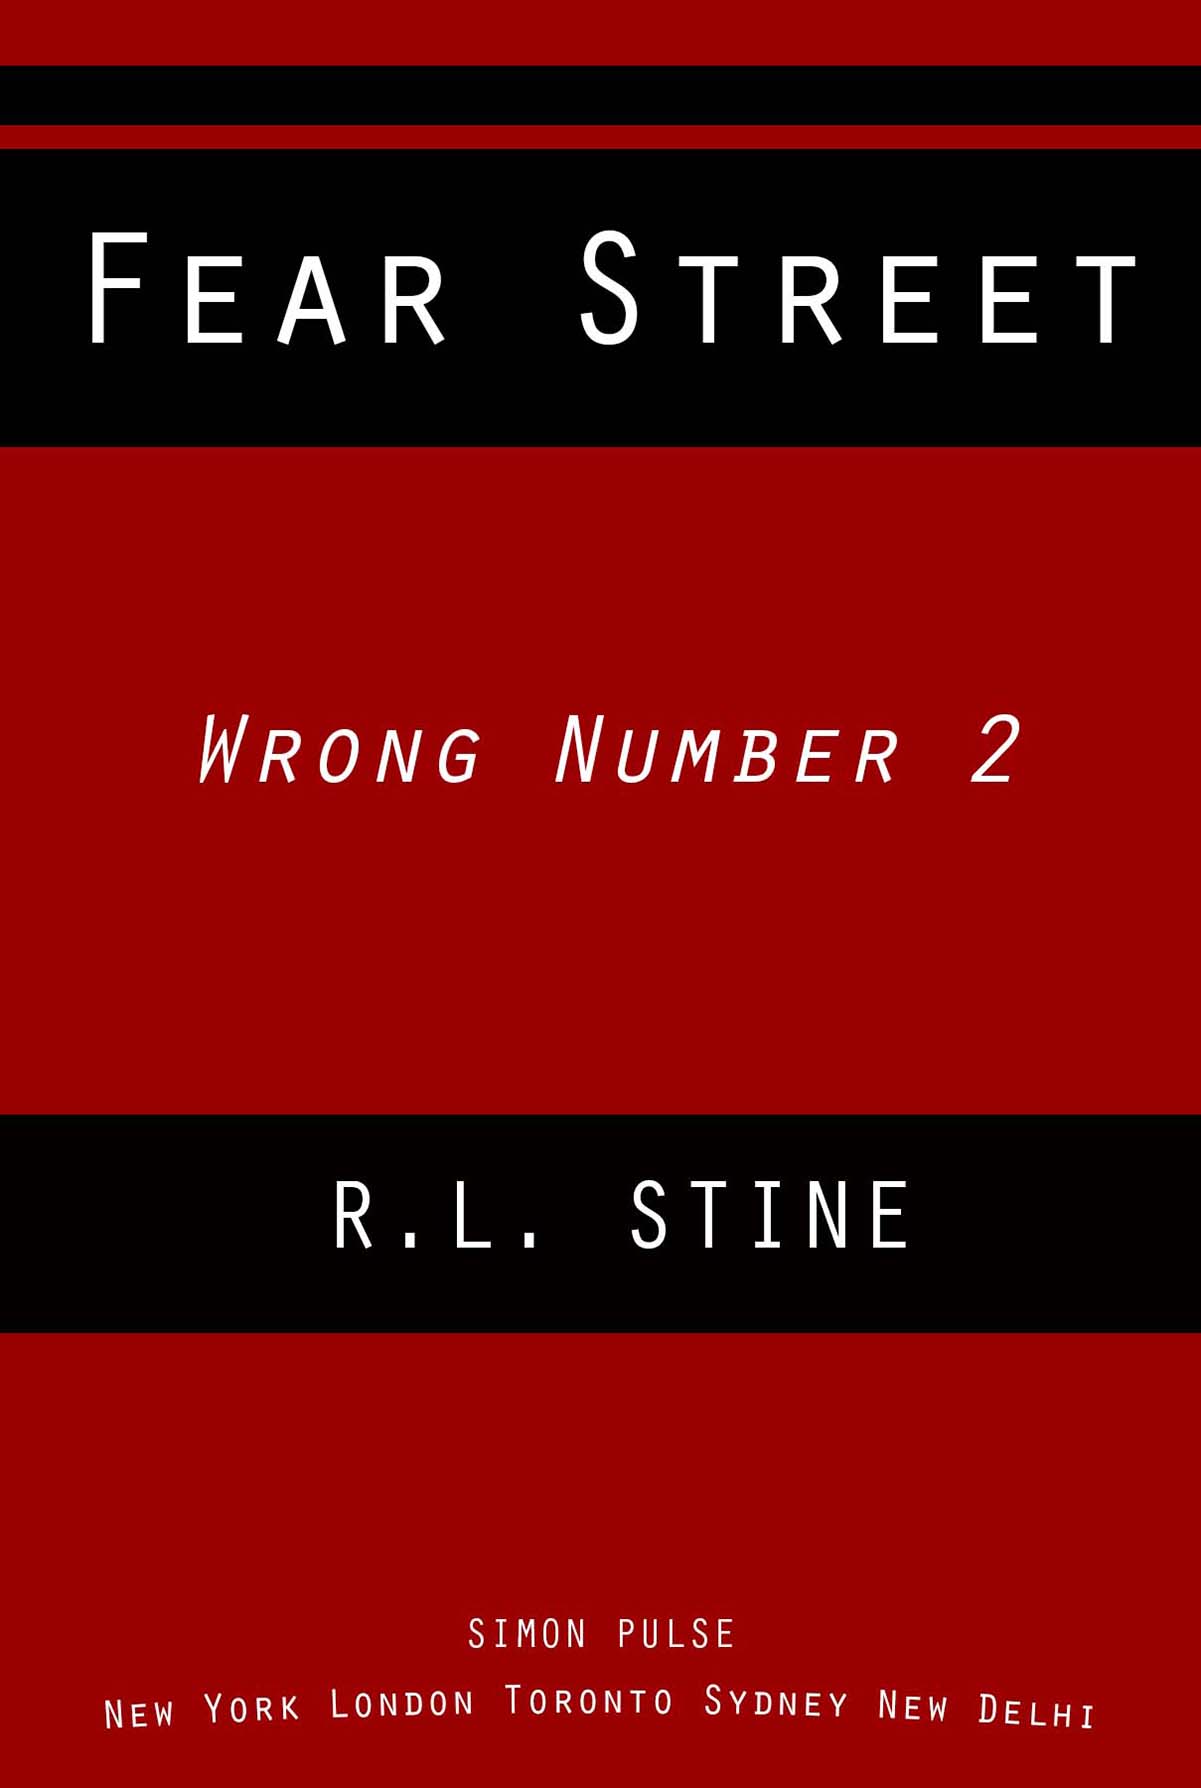 Wrong Number 2 by R.L. Stine